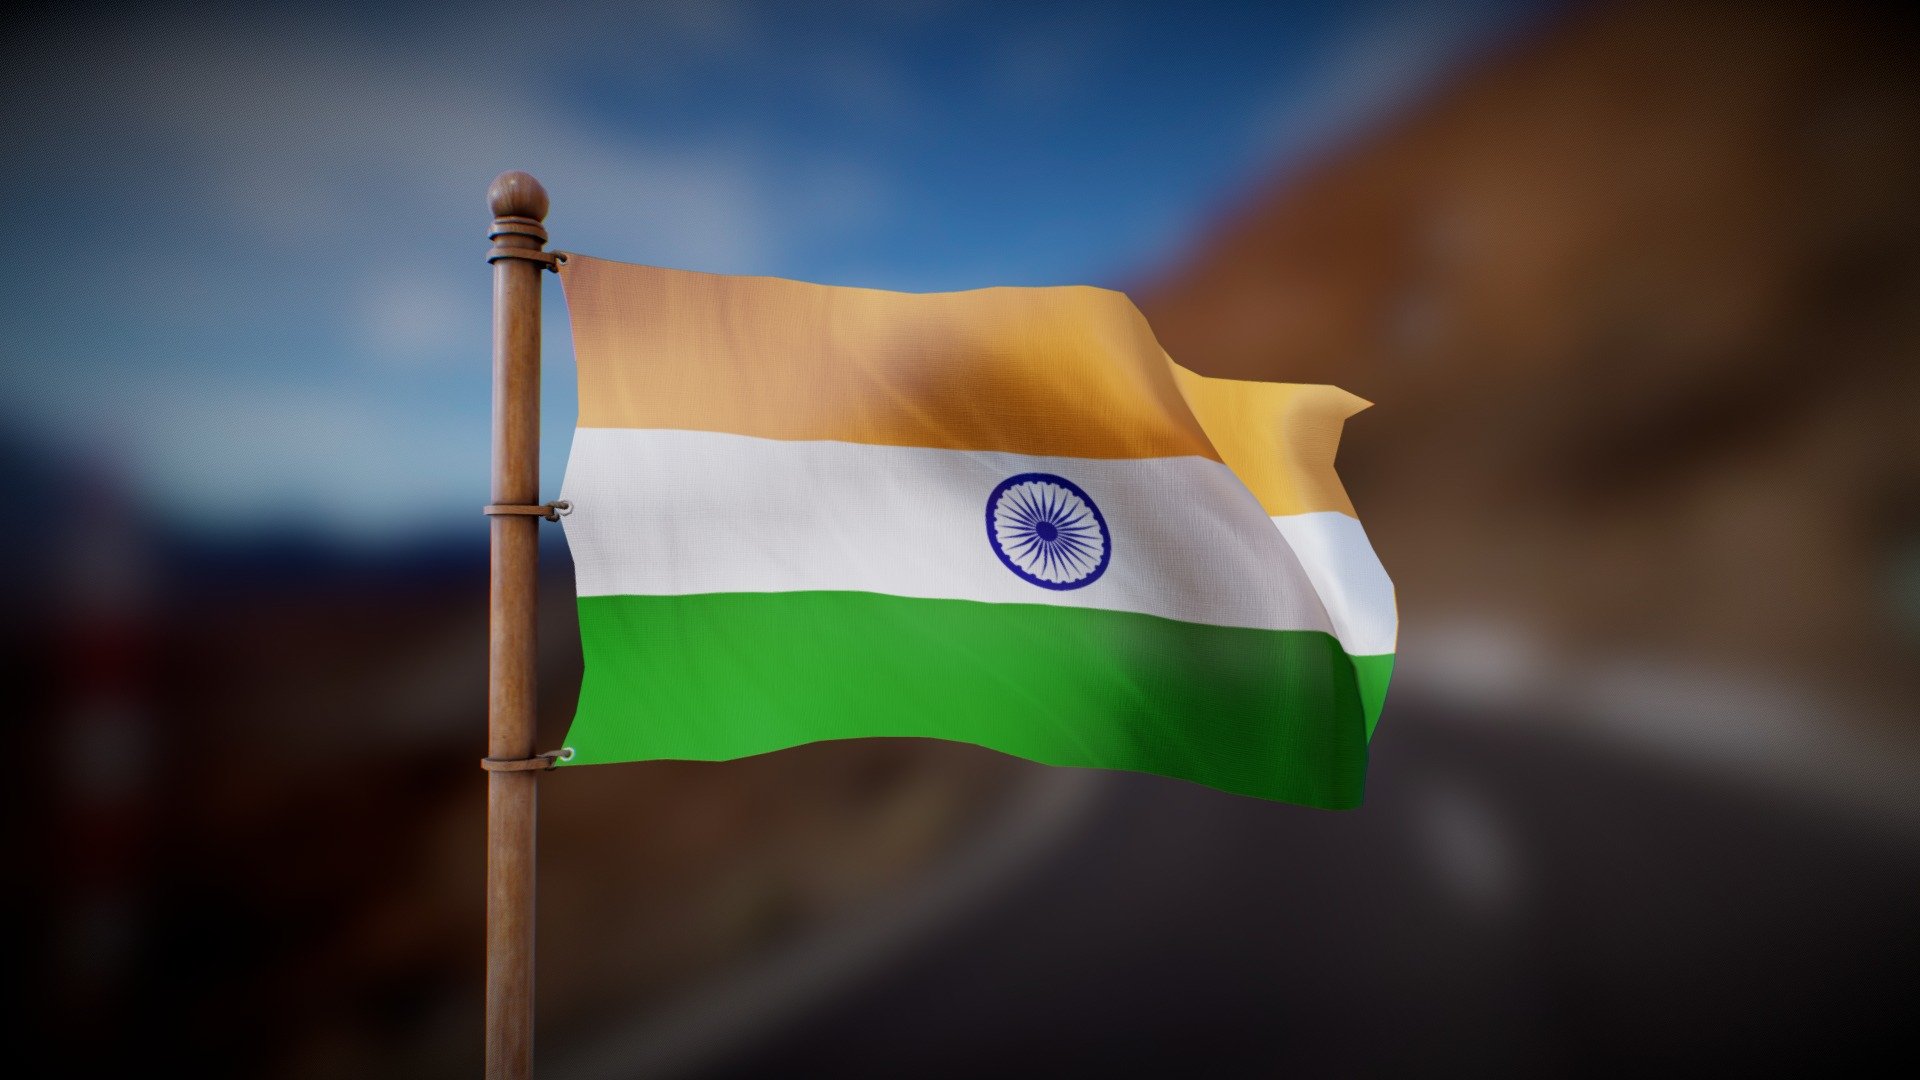 Flag waving in the wind in a looped animation

Joint Animation, perfect for any purpose
4K PBR textures

Feel free to DM me for anu question of custom requests :) - India Flag - Wind Animated Loop - Buy Royalty Free 3D model by Deftroy 3d model